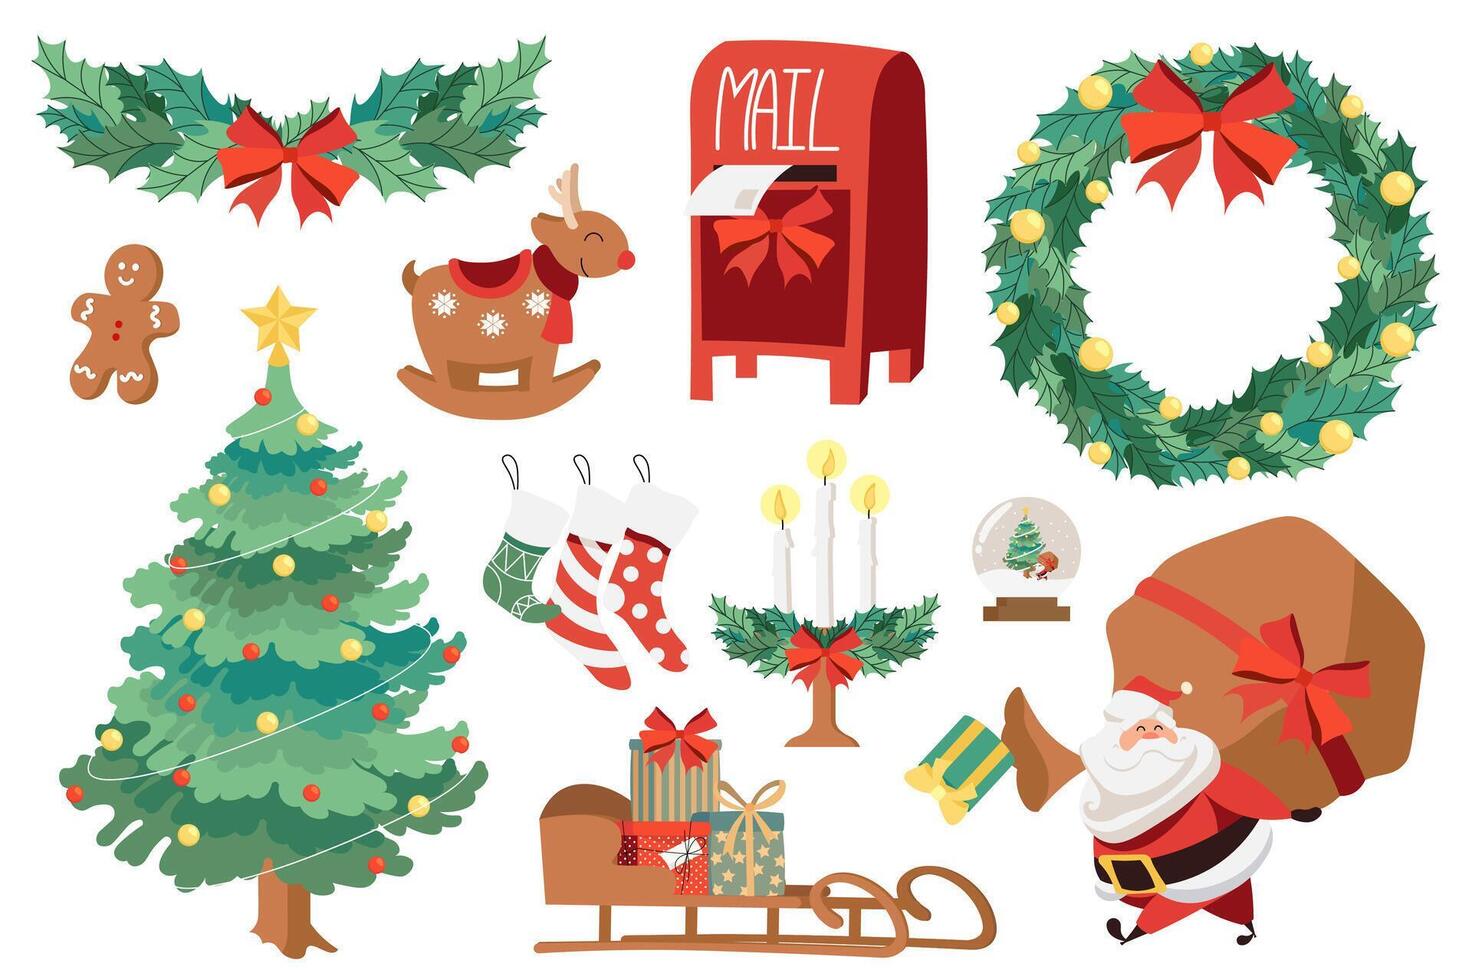 New Year mega set elements in flat design. Bundle of festive fir tree, holly wreath with bows, cookie, reindeer, mailbox, garland, Santa Clause with gifts. Vector illustration isolated graphic objects